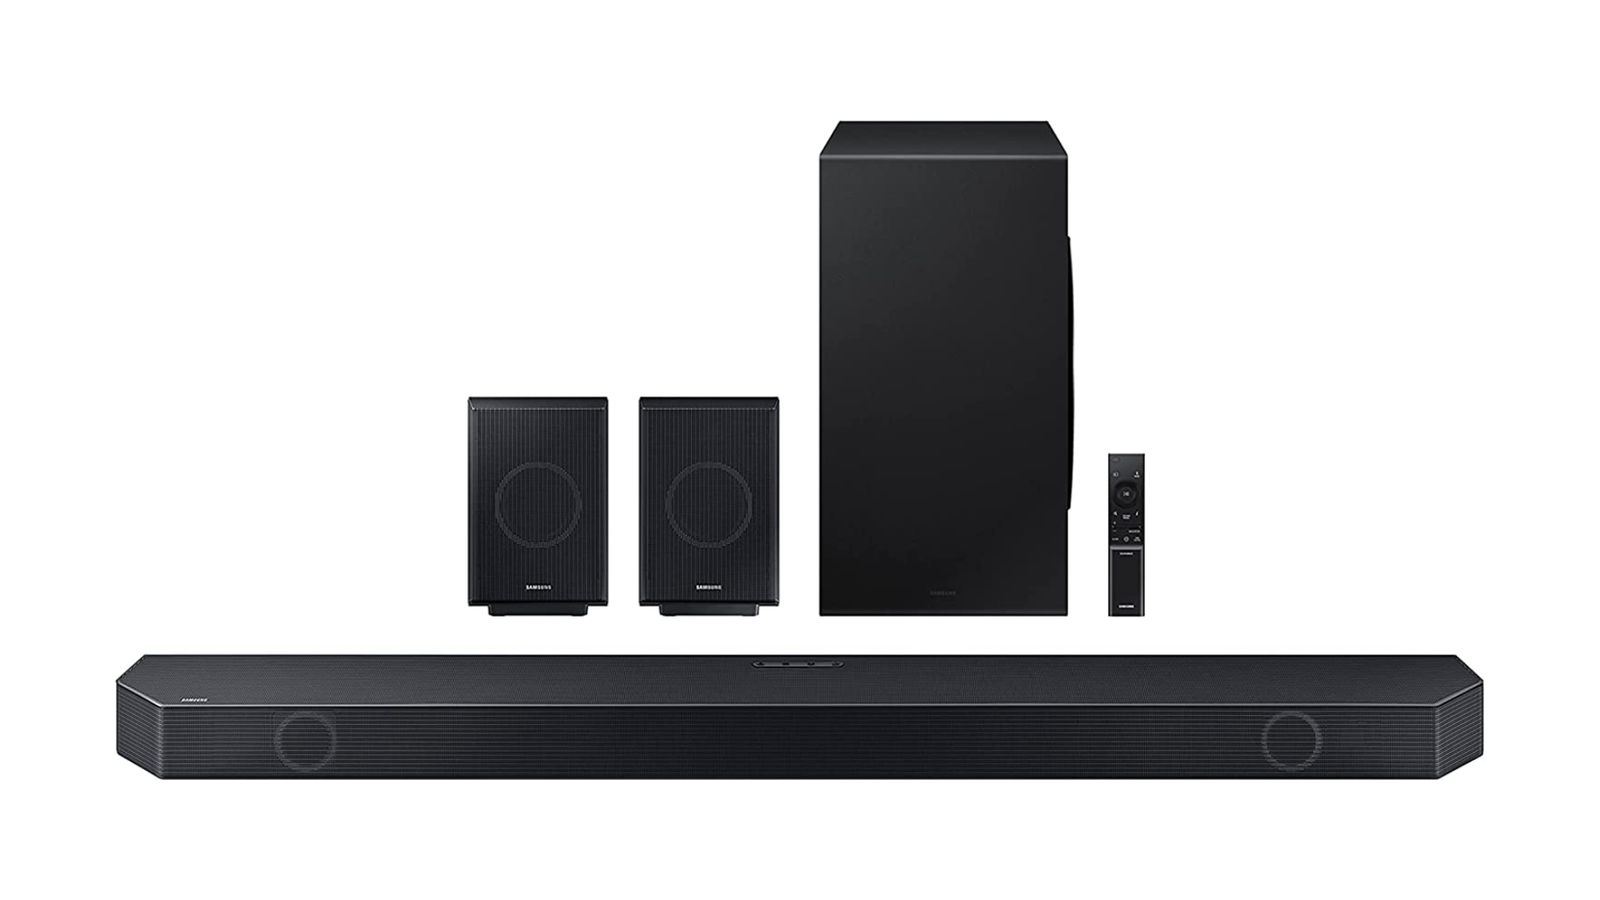 Samsung HW-Q990C product image of a long black soundbar in front of two black speakers, a remote, and a subwoofer.